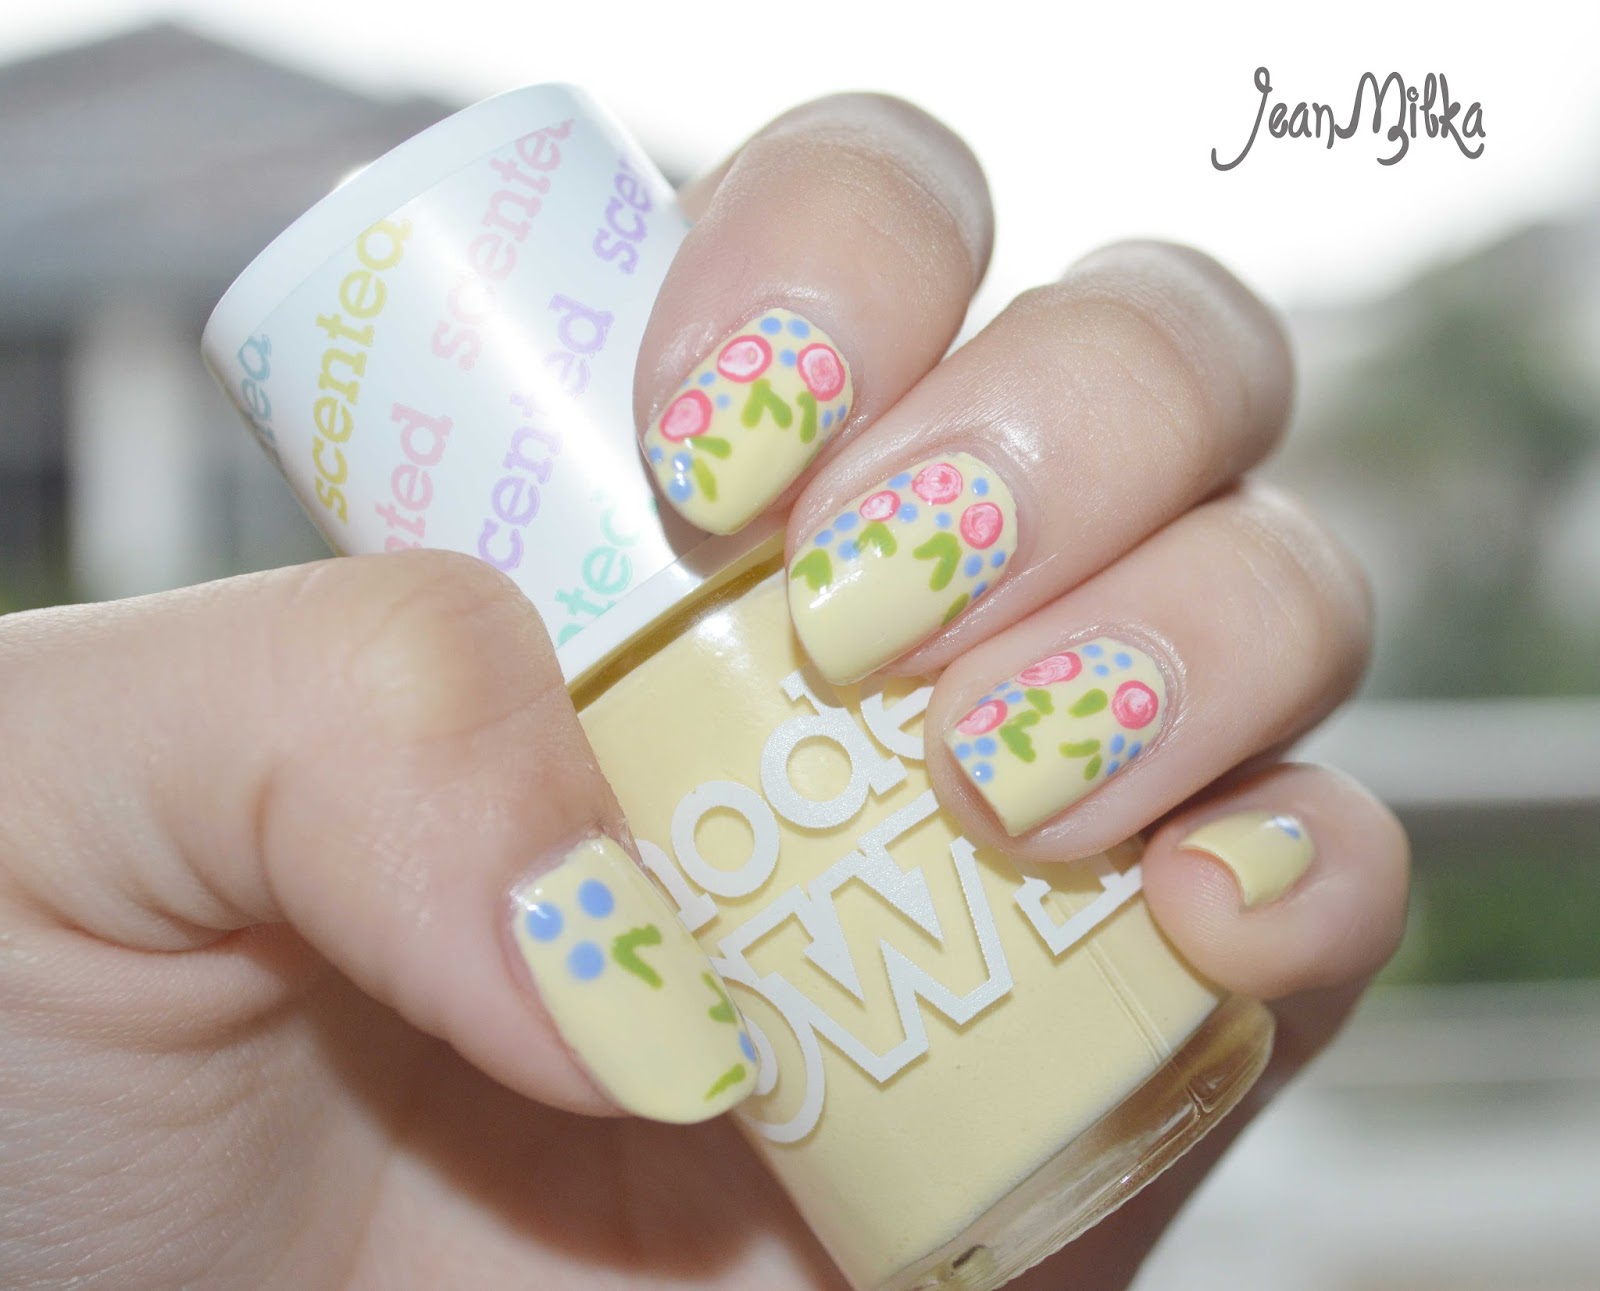 5. Cute and Simple Pastel Nail Designs for Spring - wide 9